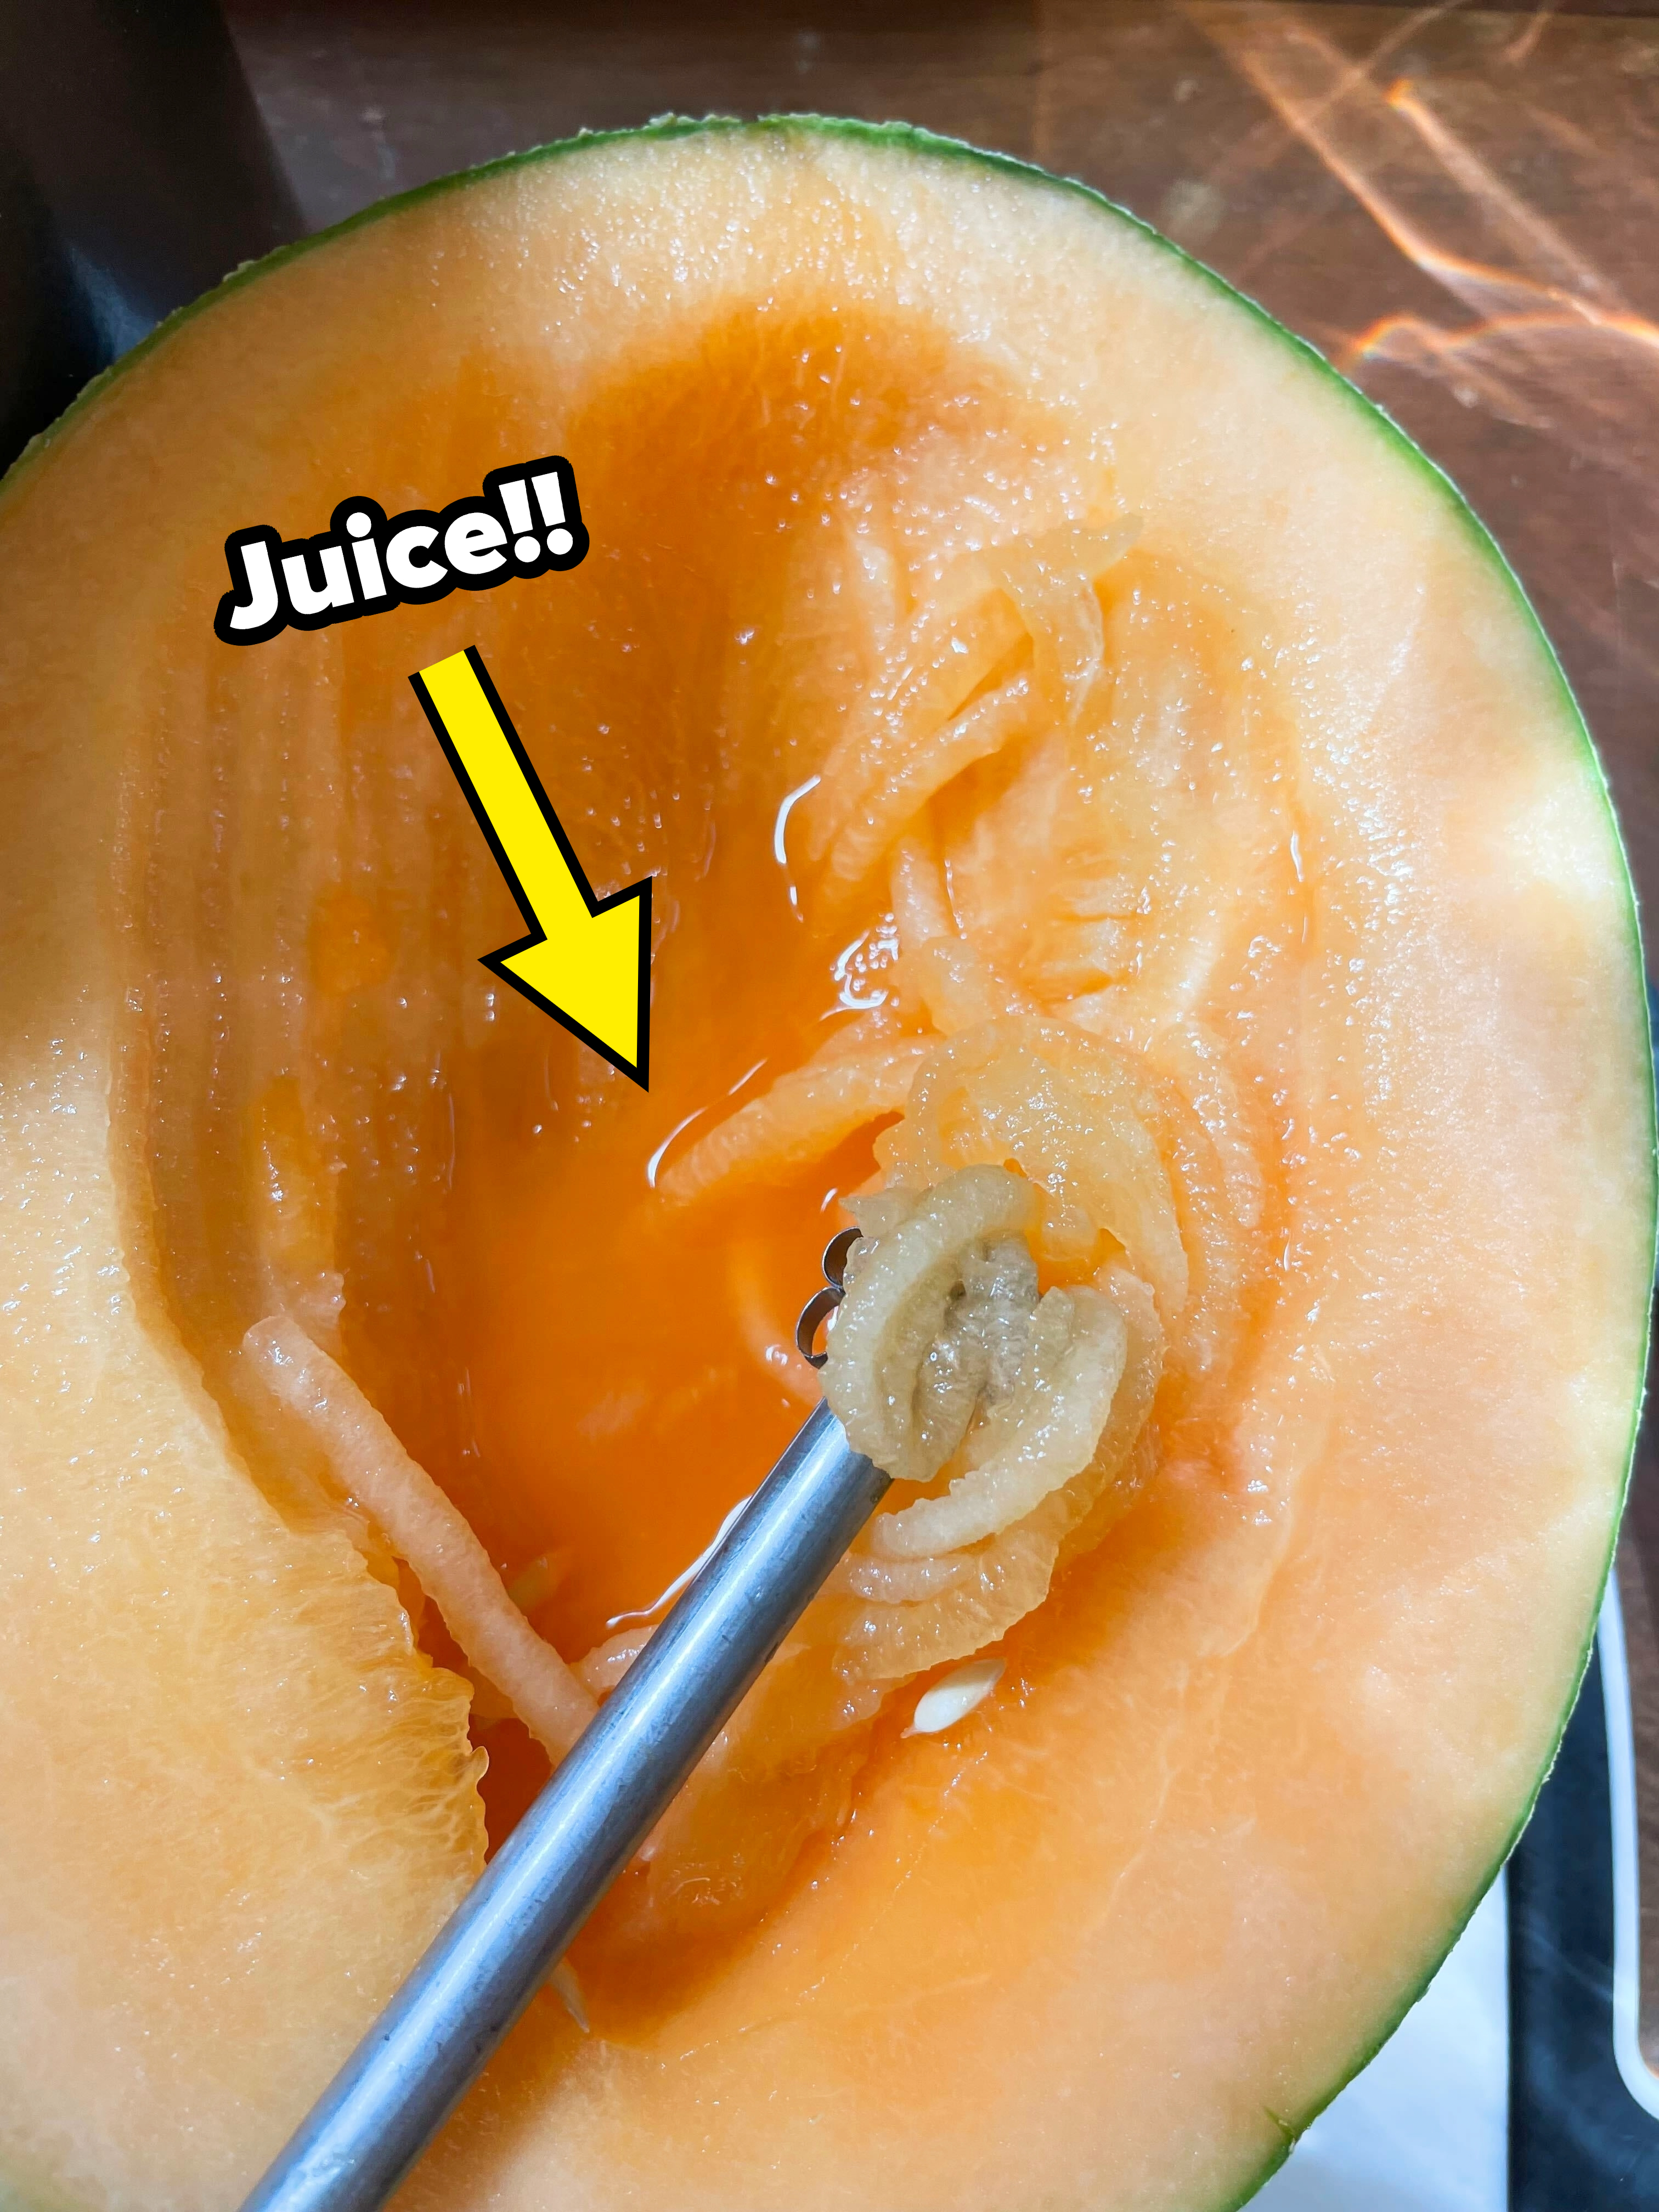 The author is scraping out the melon; the annotation reads, &quot;Juice!!&quot;